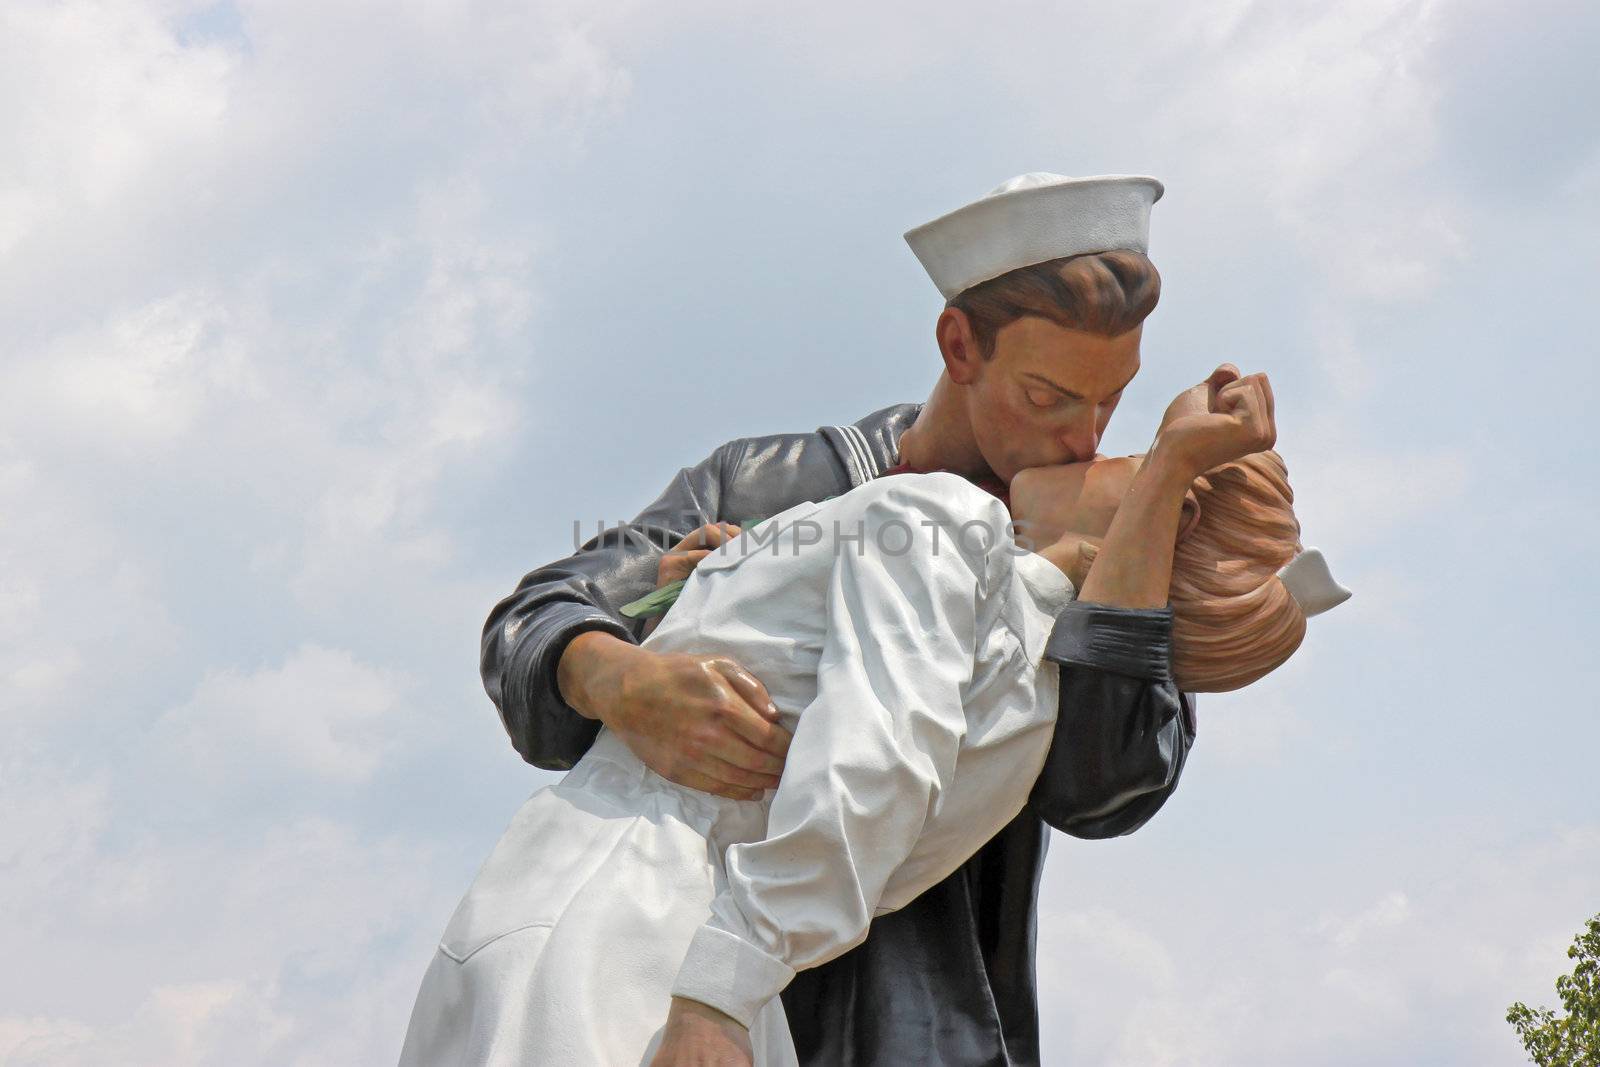 SARASOTA, Florida - MAY 23: The statue titled "Unconditional Surrender" in the center of Sarasota, Florida on May 23, 2011. The statue was hit by a car and removed for repairs on April 27, 2012.